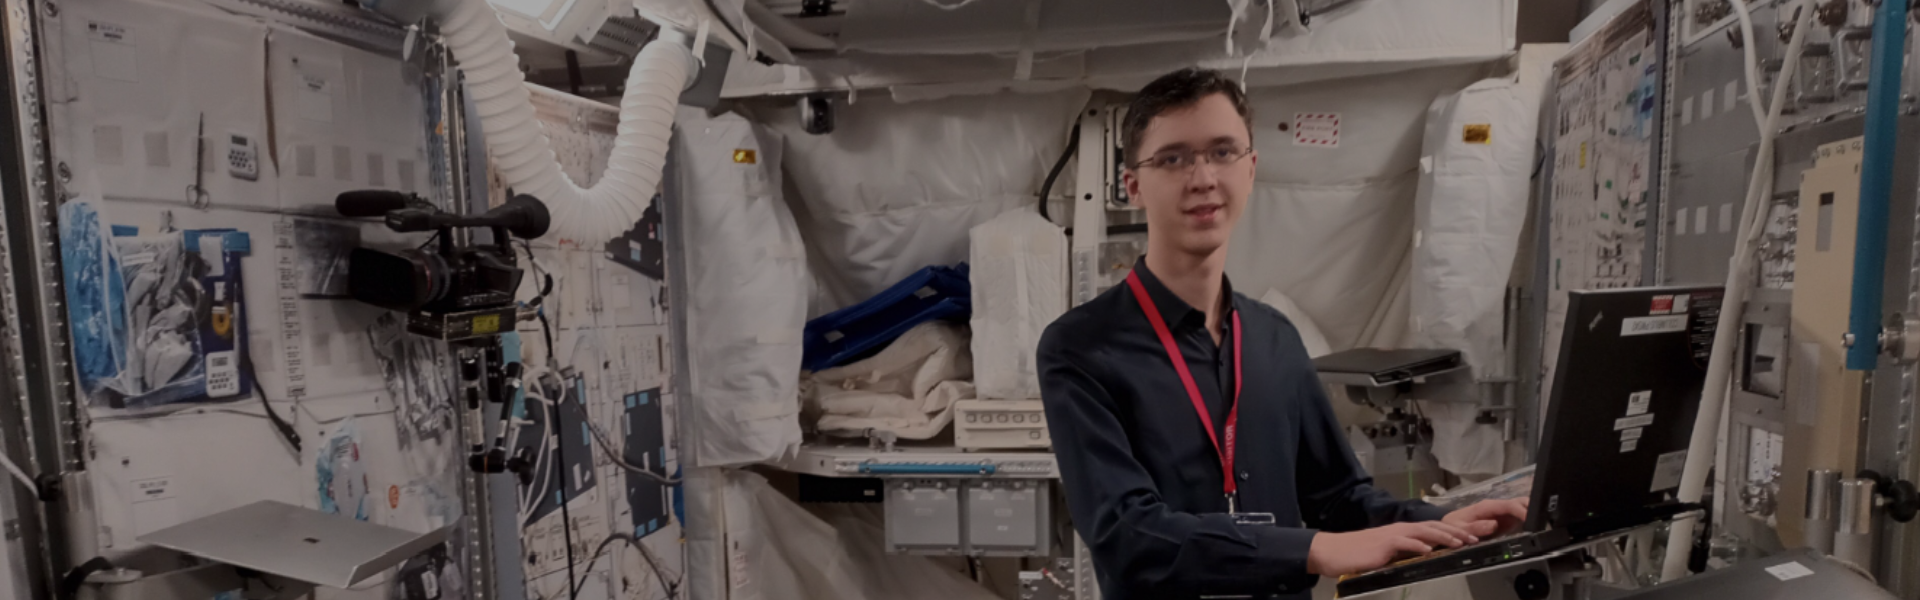 A Day in the Life of an Astronaut: Internship at the European Astronaut Centre